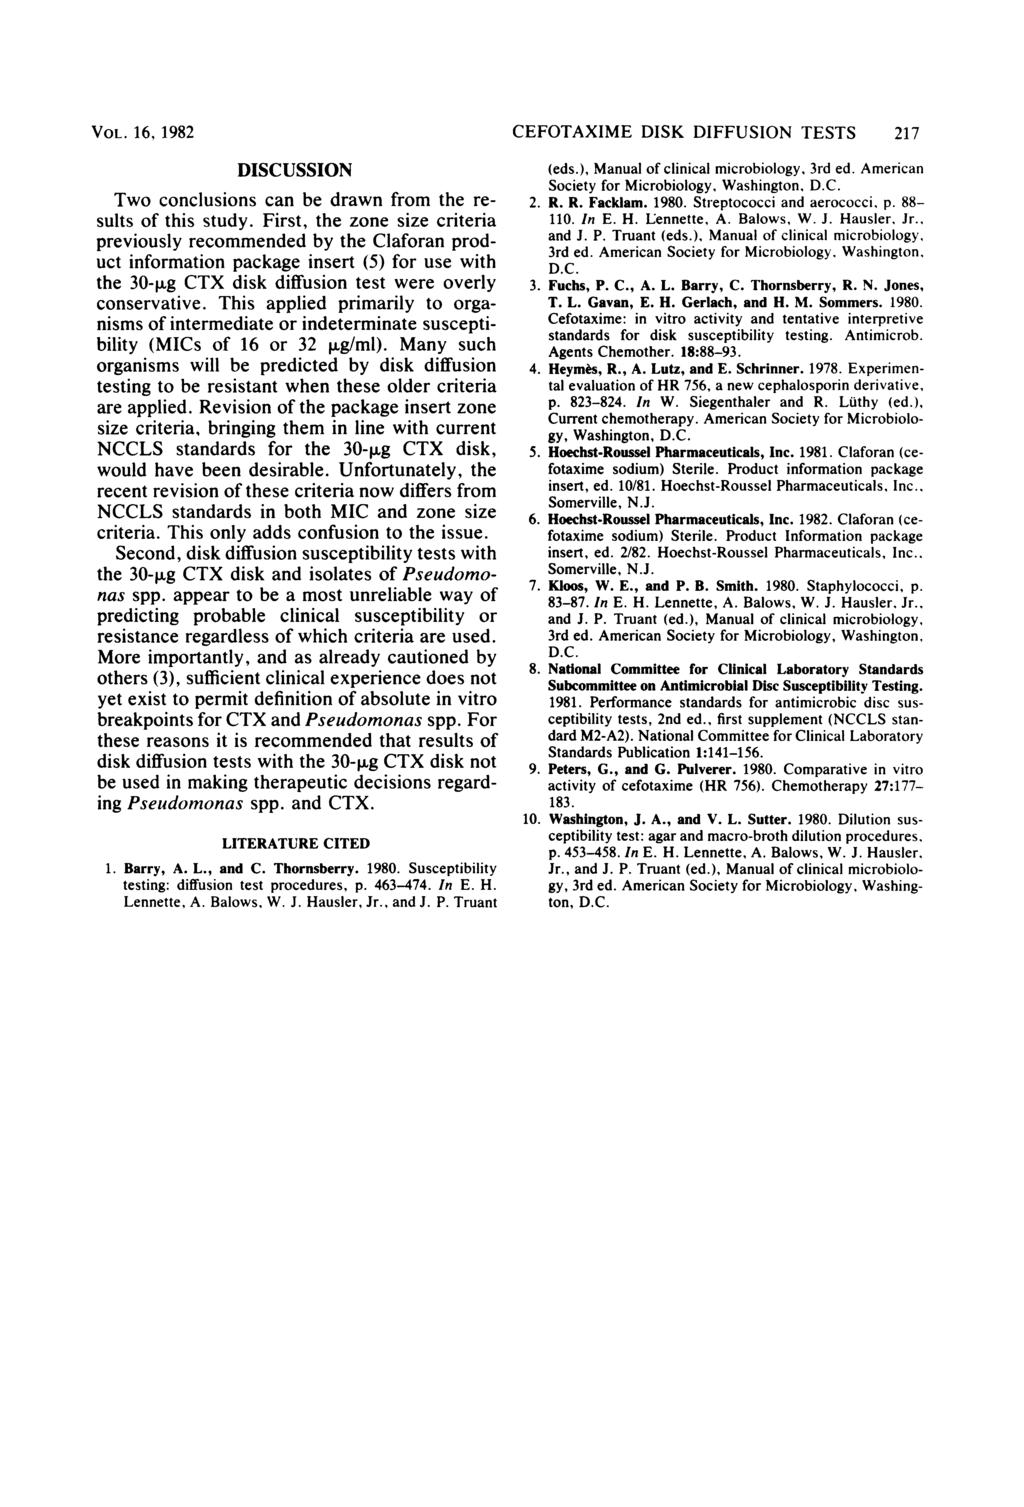 VOL. 16, 1982 DISCUSSION Two conclusions can be drawn from the results of this study.